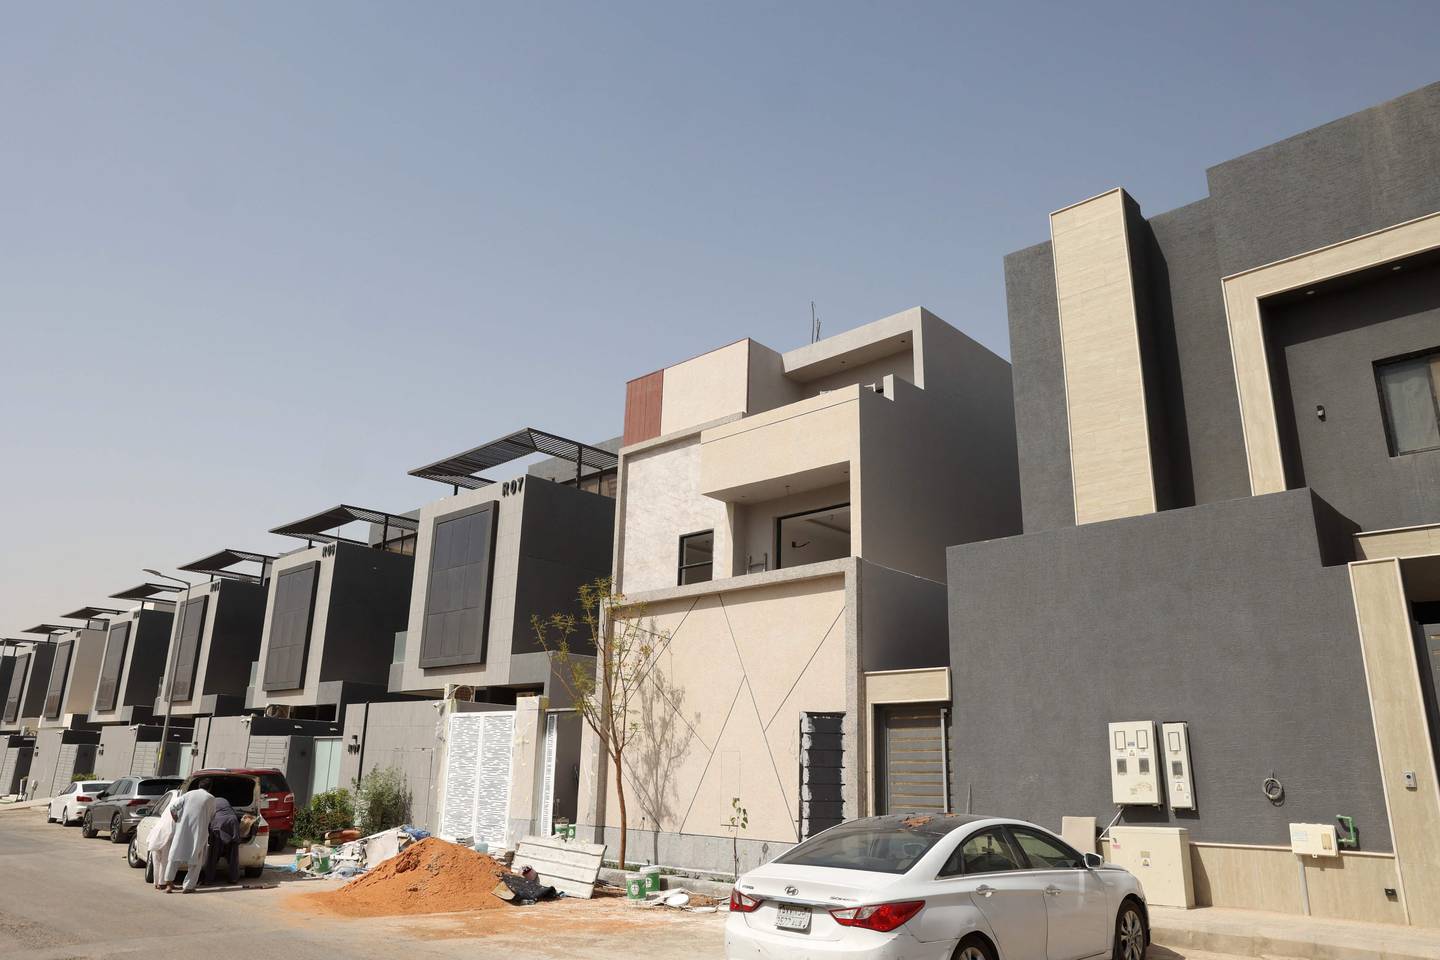   Saudi Arabia has set an ambitious target of raising home ownership rates in the kingdom to 70 per cent by 2030 under the Sakani programme. AFP